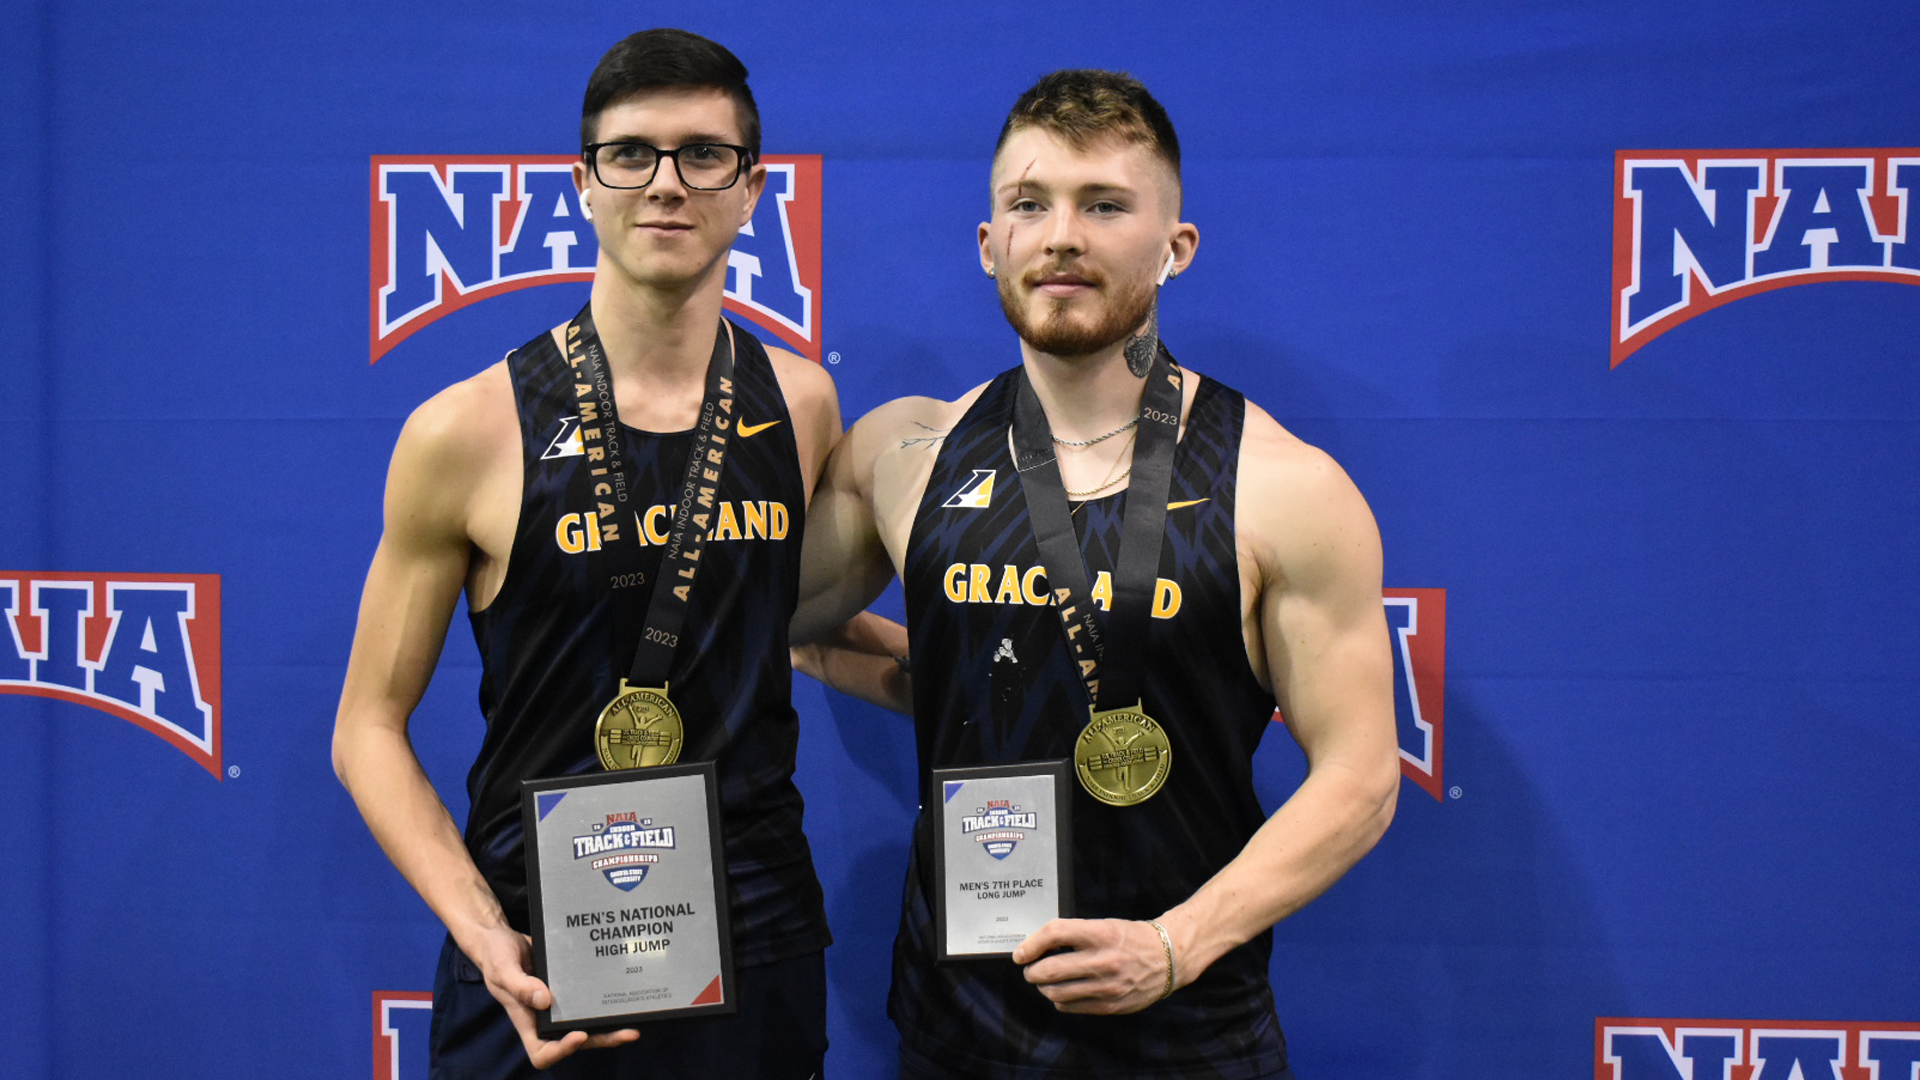 Men's Indoor Track and Field Conclude at the NAIA National Championship; Millslagle Claims National Title; Marchand Eared All-American